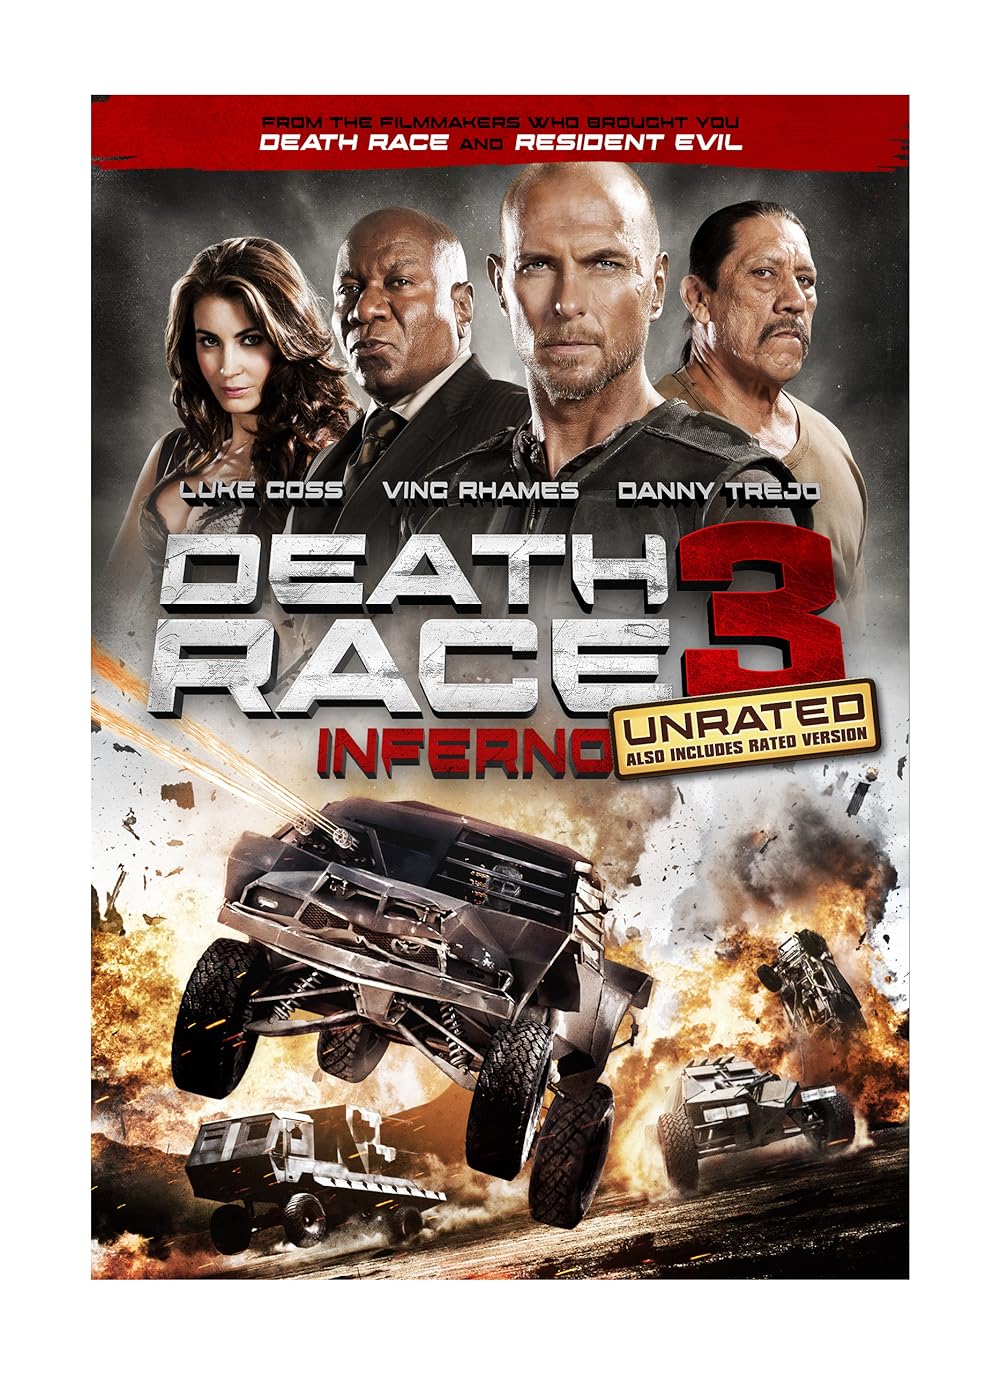 Death Race: Inferno (2013) Unrated Cut 384Kbps 23.976Fps 48Khz 5.1Ch DVD Turkish Audio TAC